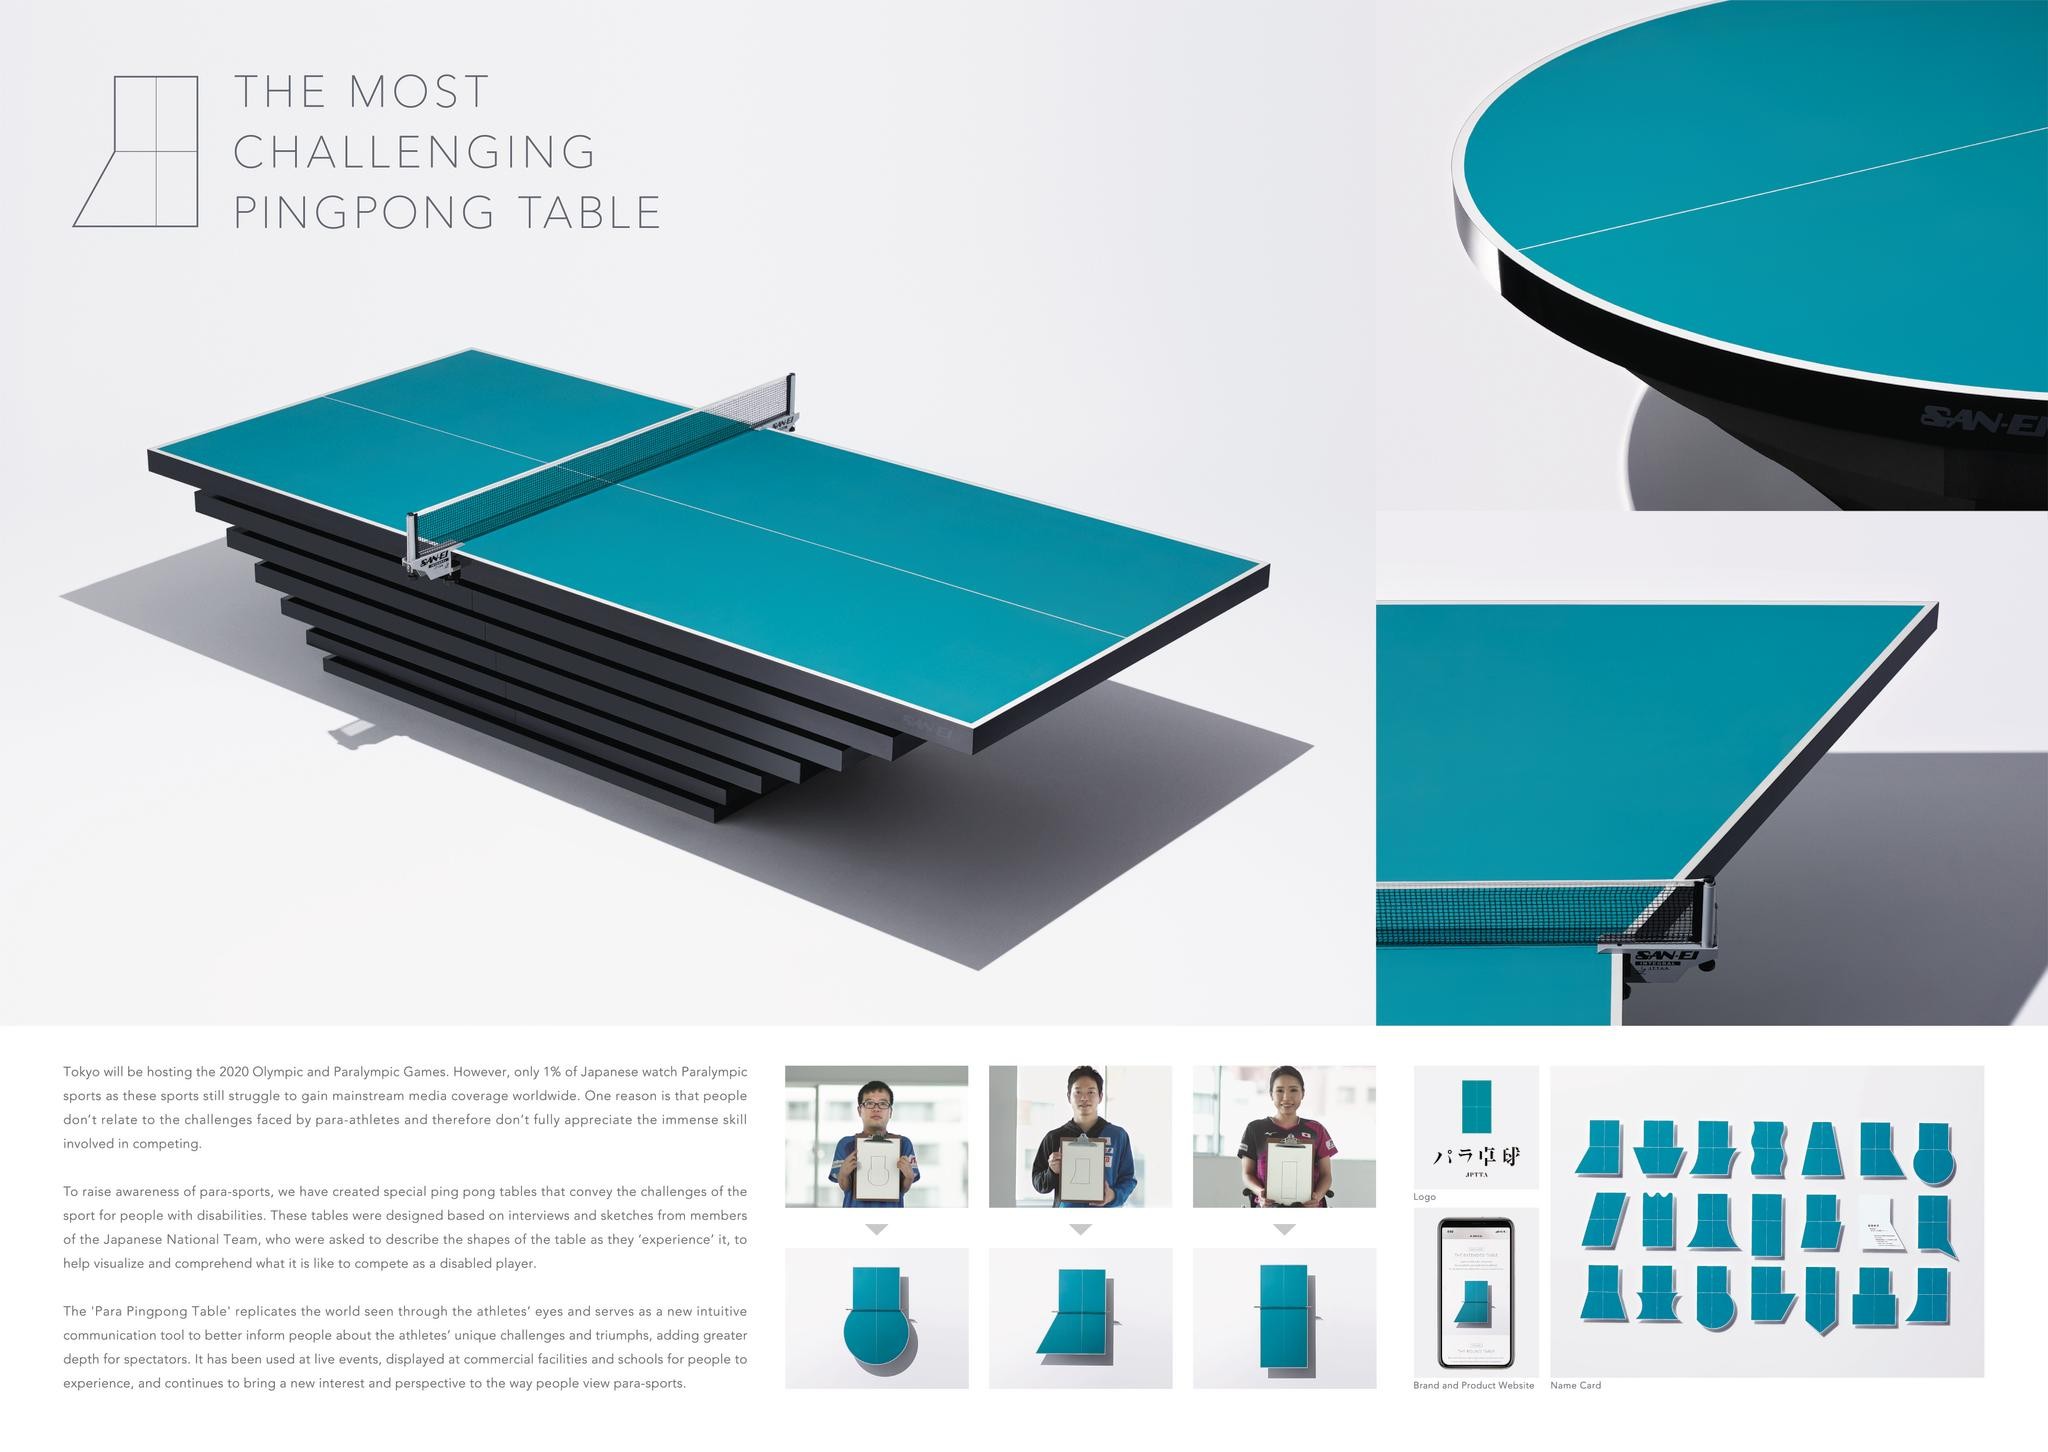 THE MOST CHALLENGING PINGPONG TABLE